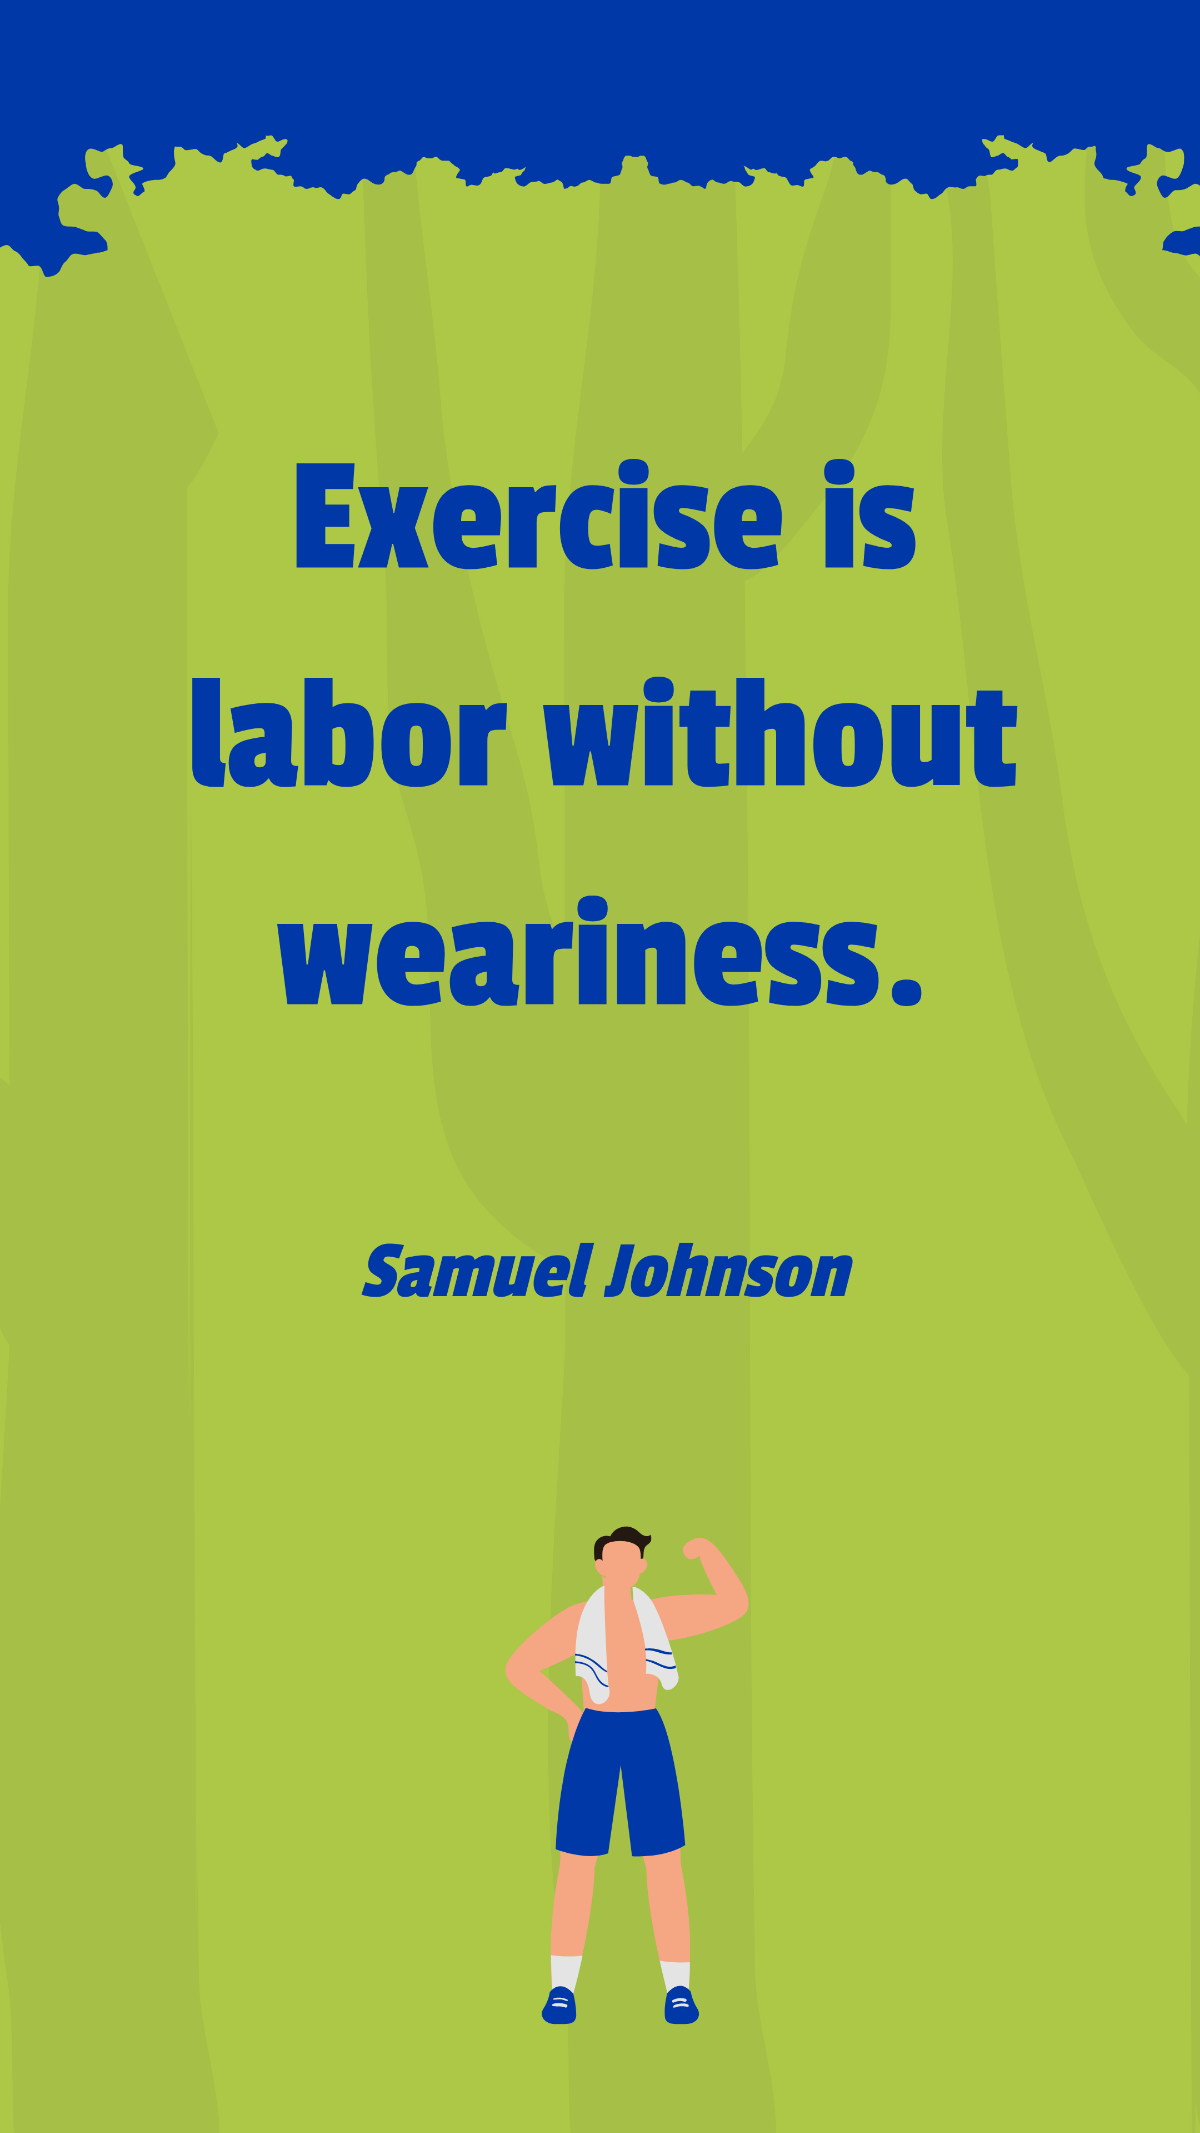 Samuel Johnson - Exercise is labor without weariness. Template